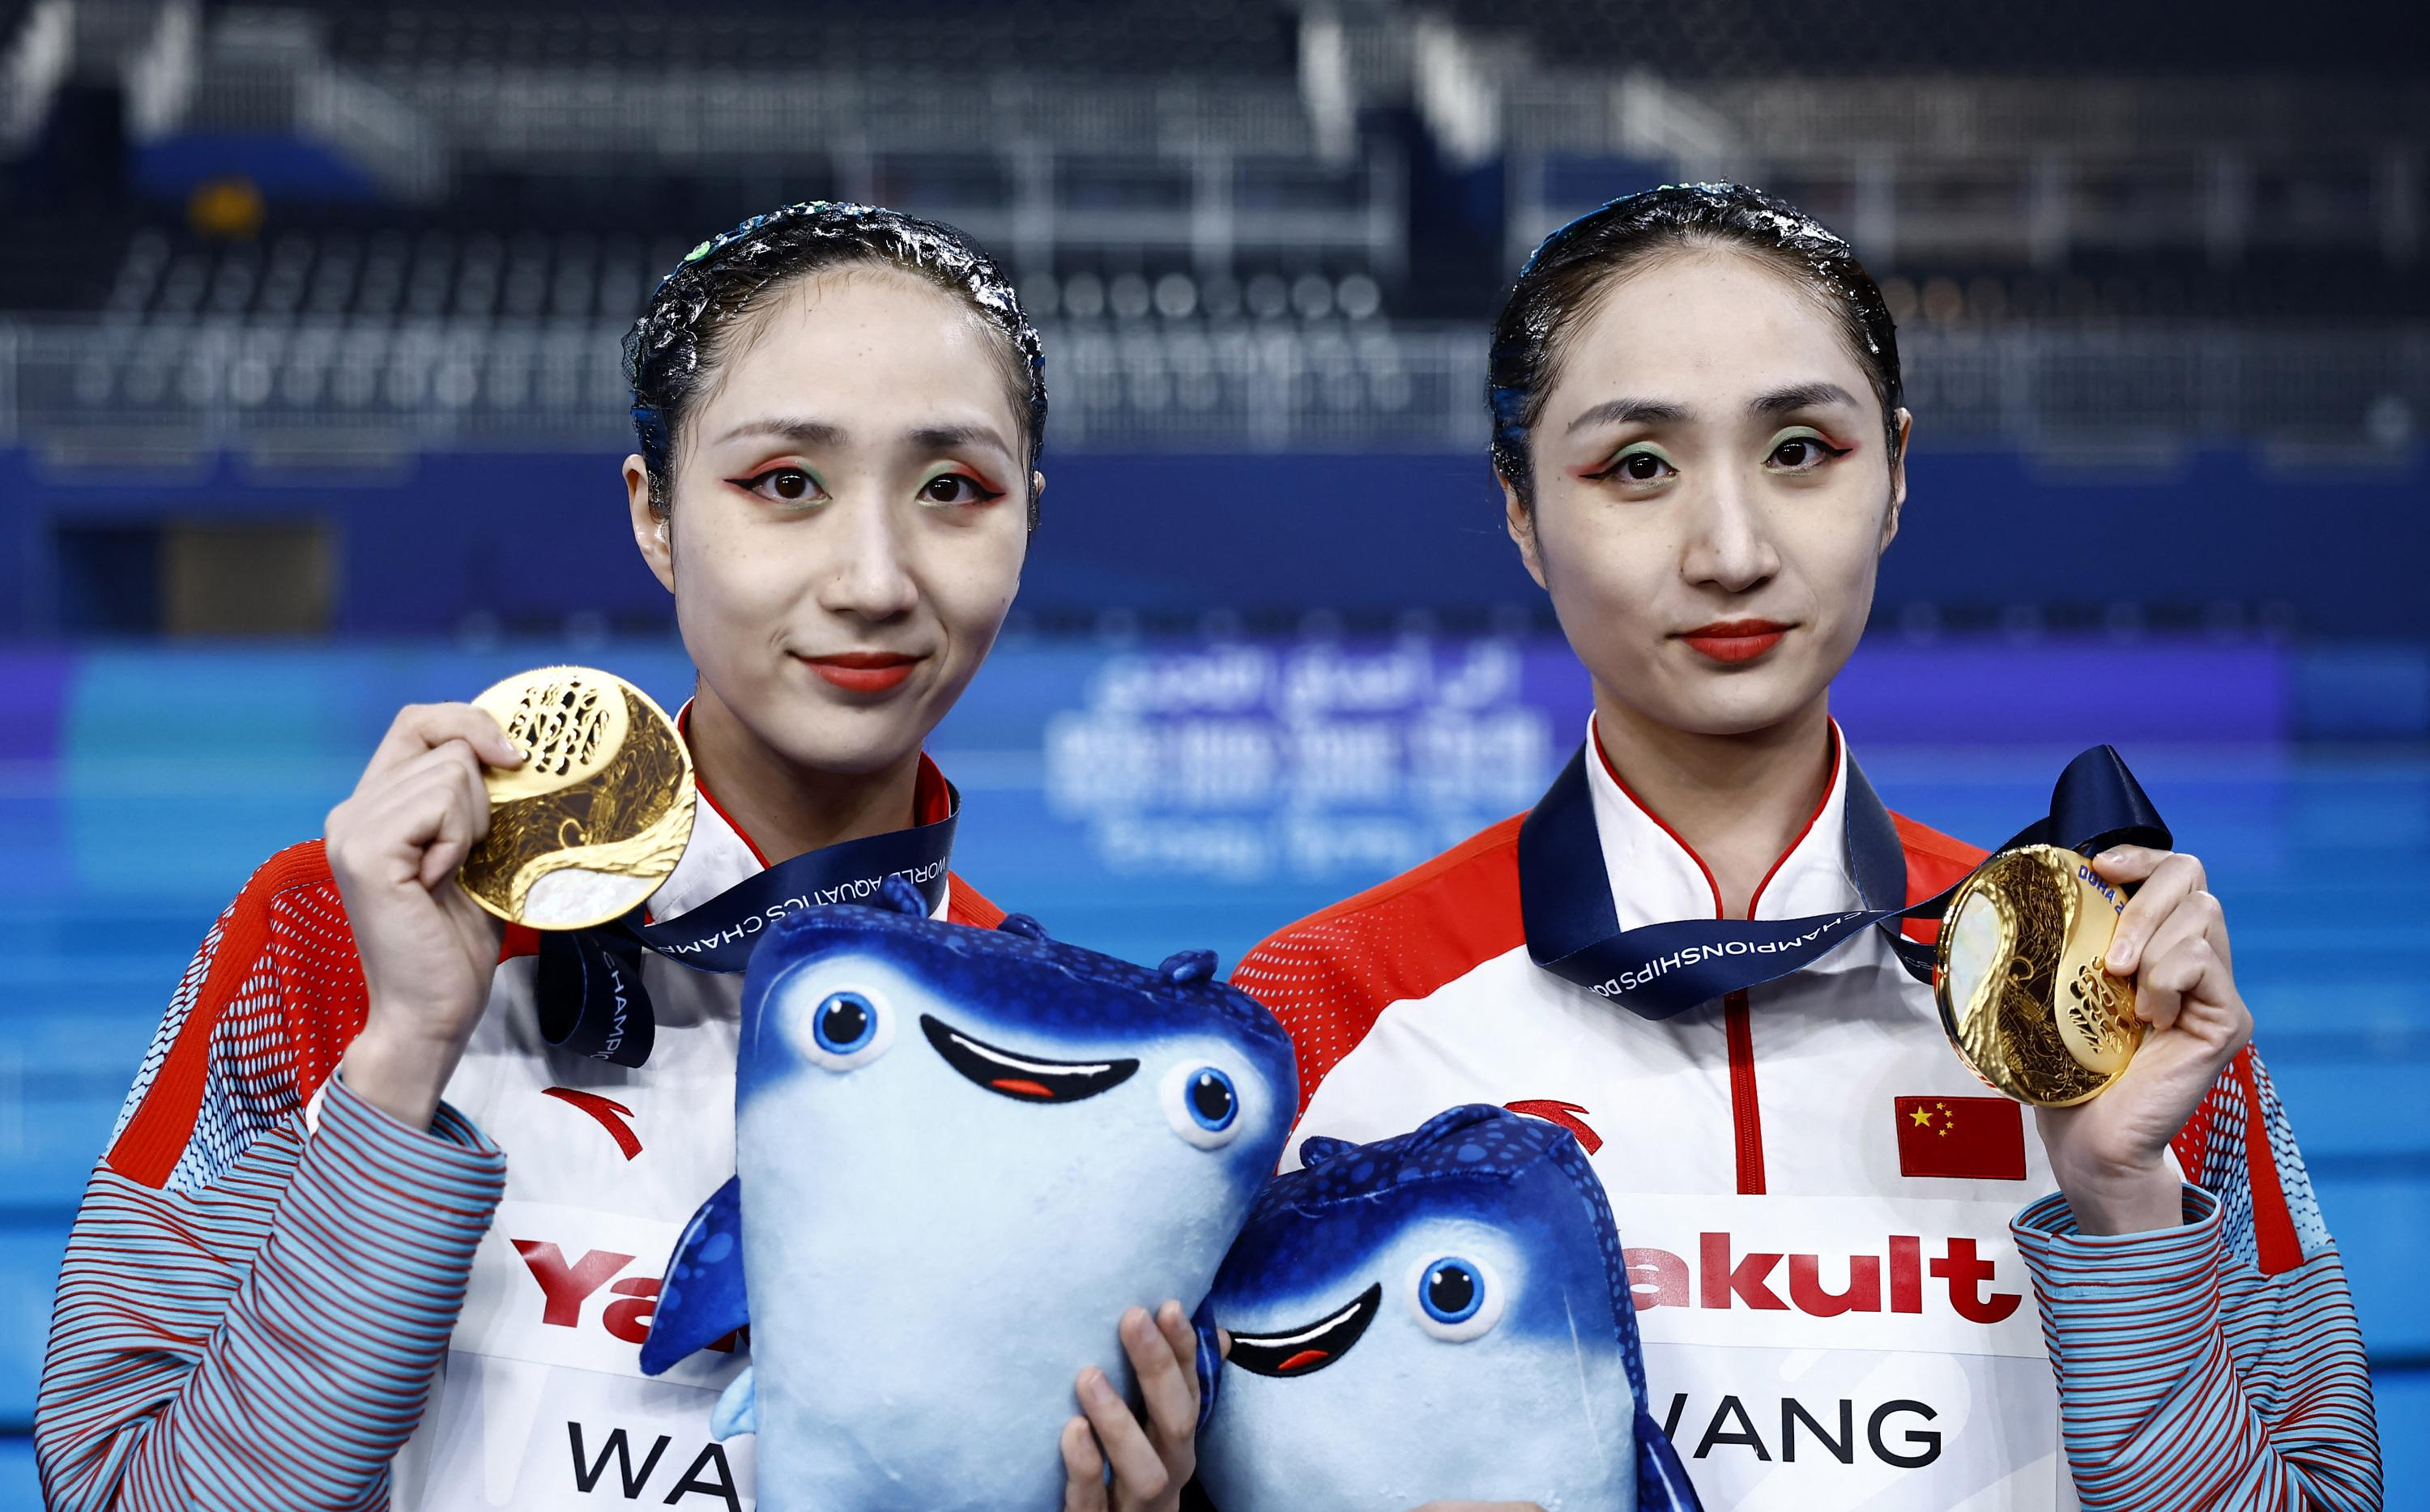 World Artistic Swimming Championships: Wang sisters crowned for the second time